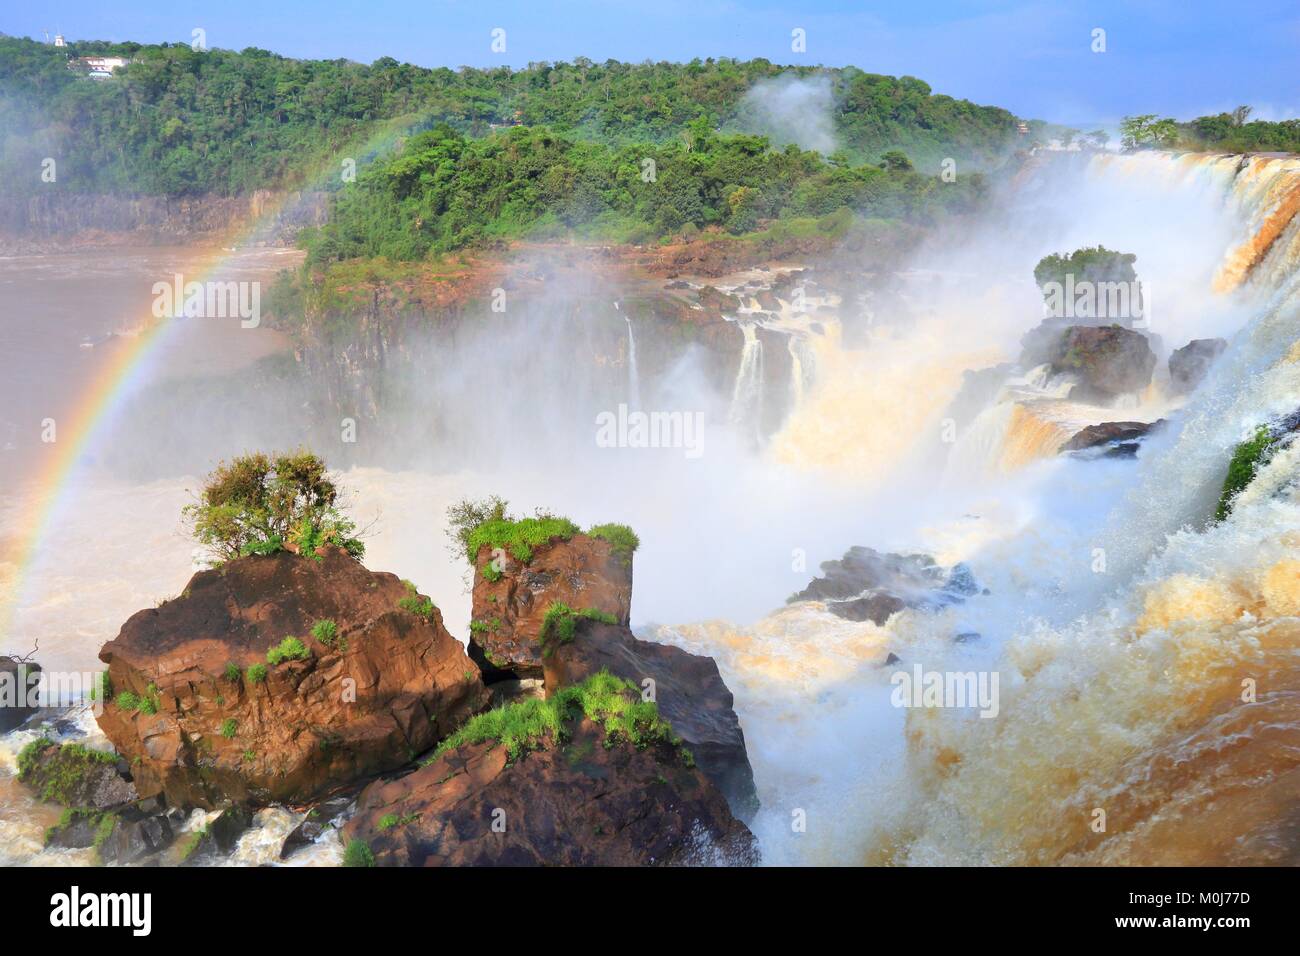 Iguazu Falls - waterfalls on Brazil and Argentina border. National park and UNESCO World Heritage Site. View from Argentinian side. Stock Photo